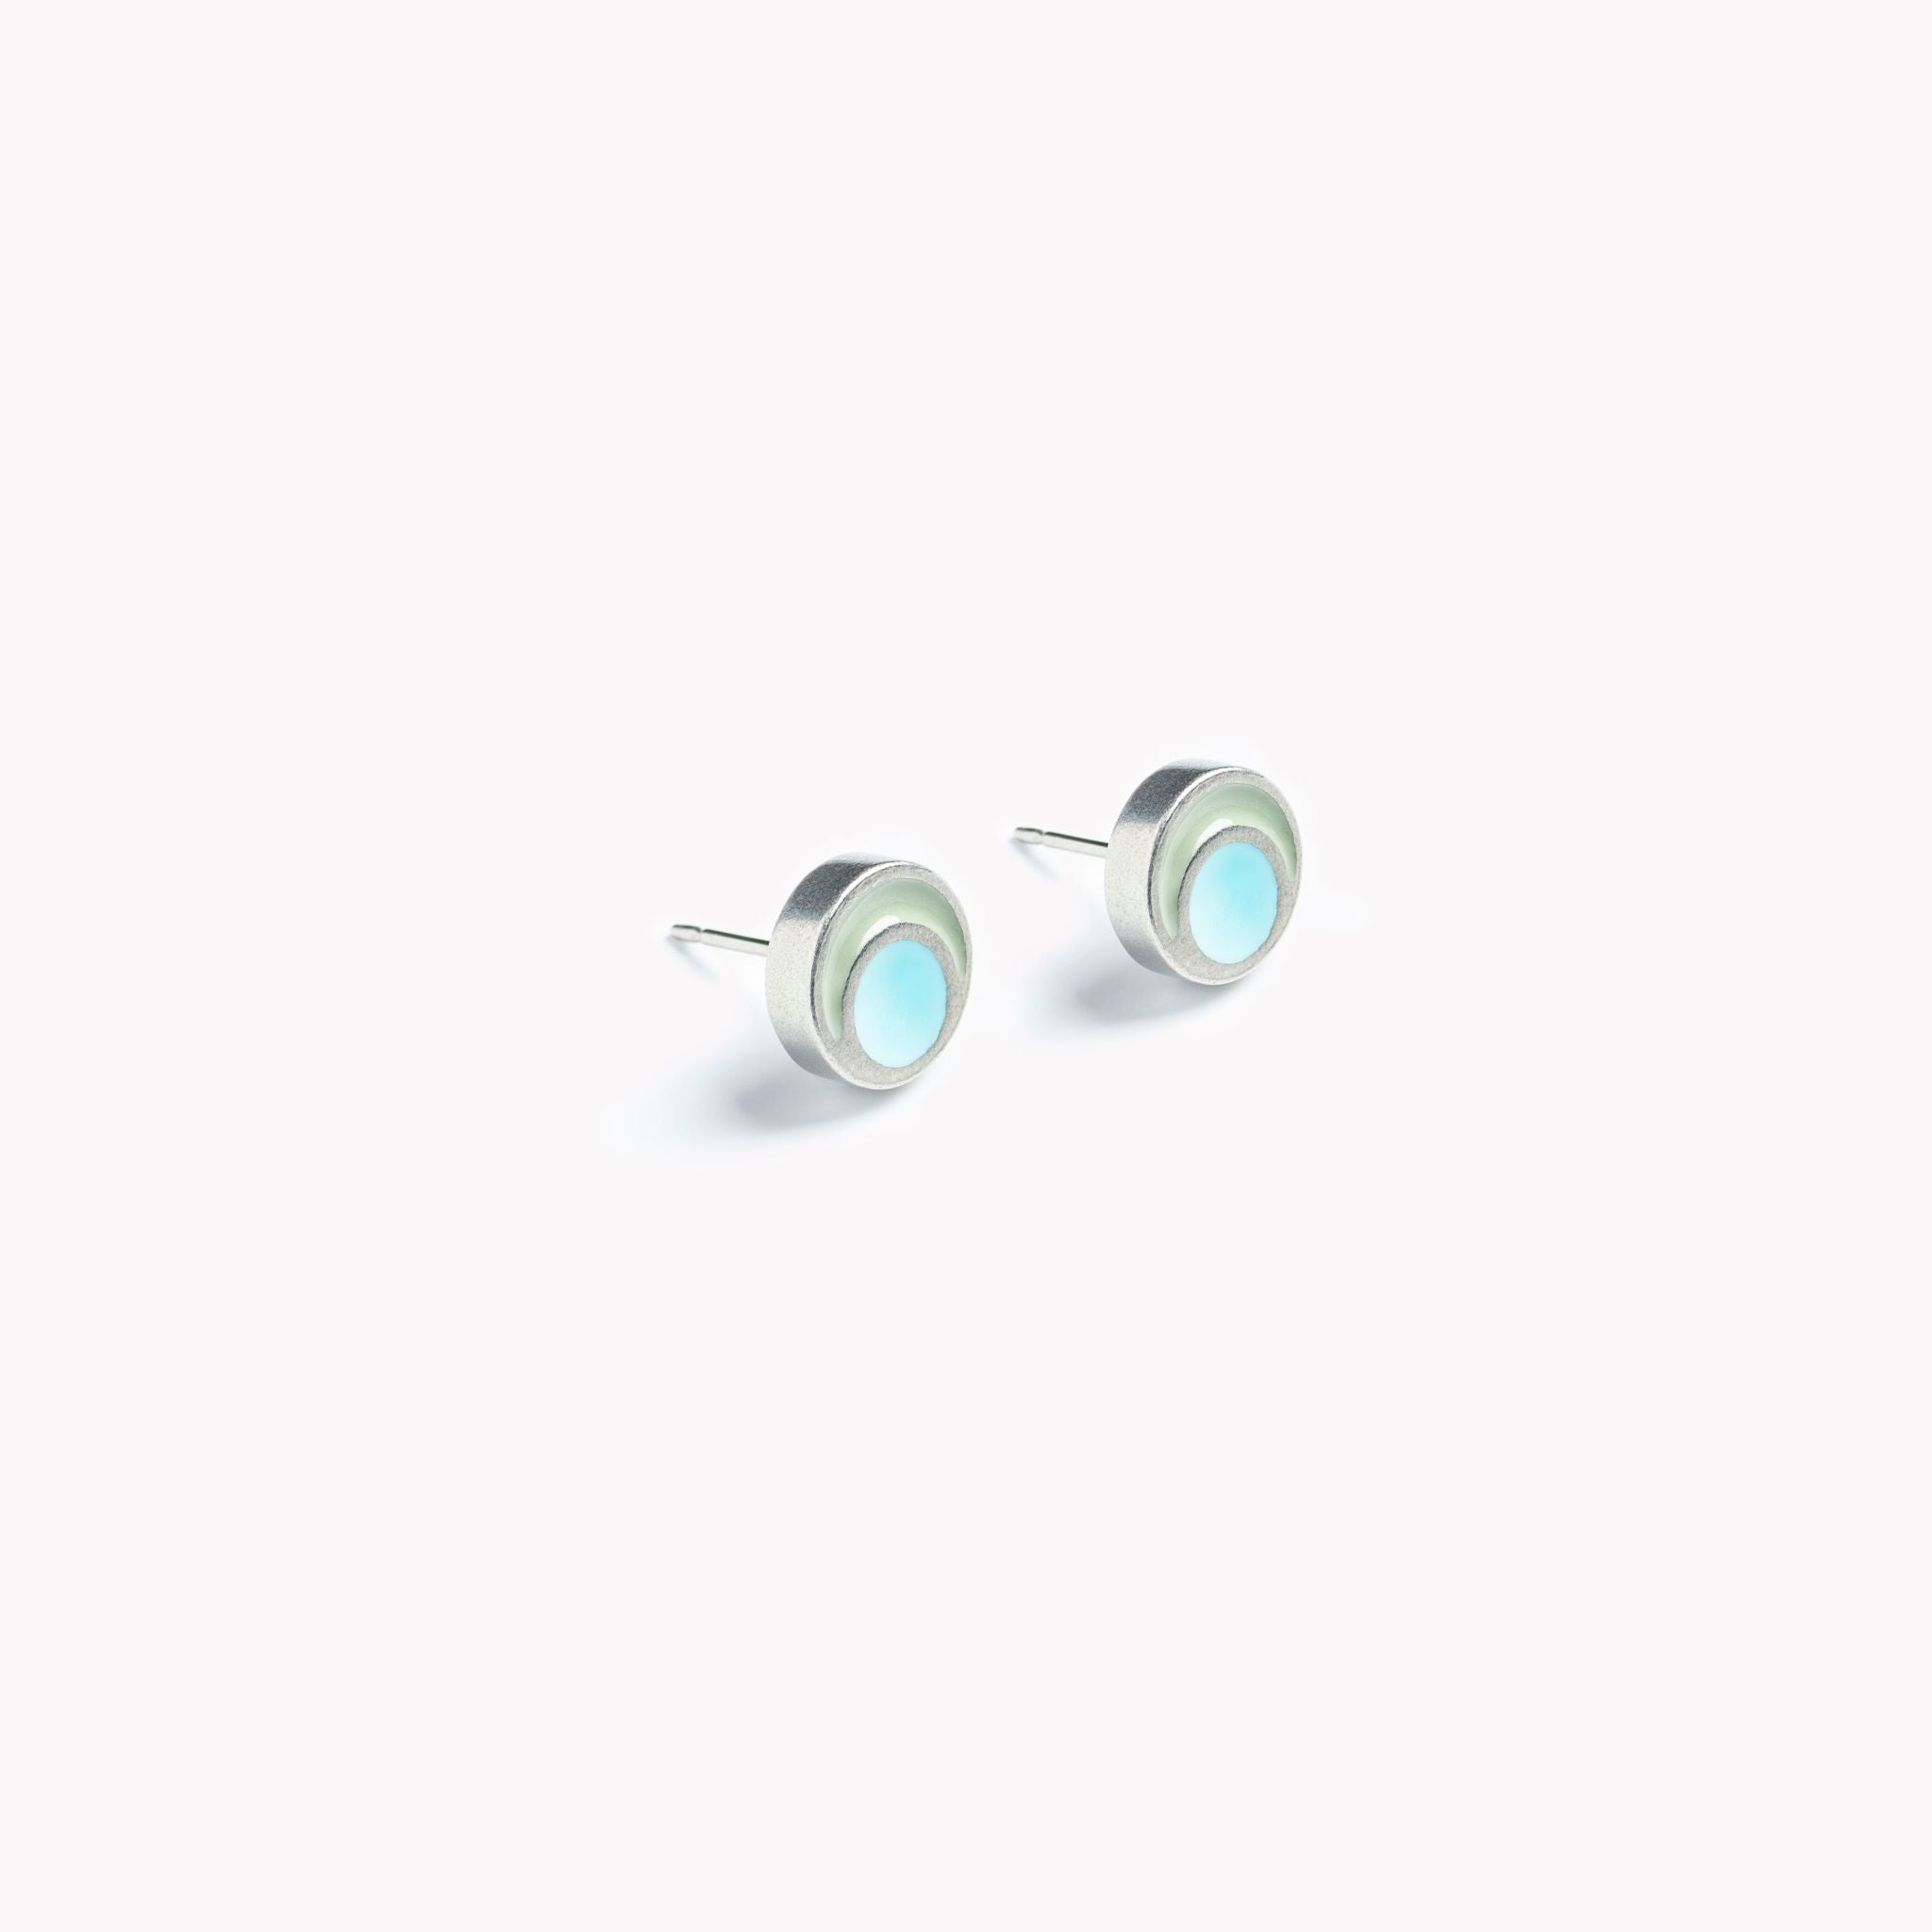 The image shows a pair of simple, vibrant, grey and turquoise circular stud earrings. Pictured  on a crisp white background, the light turquoise circular inset is surrounded by a pale grey rim  leading to a brightly polished pewter edge. The circular stud earrings are bathed in sunlight,  showing off the beautifully reflective surface of these minimal, modern and colourful  stud earrings.